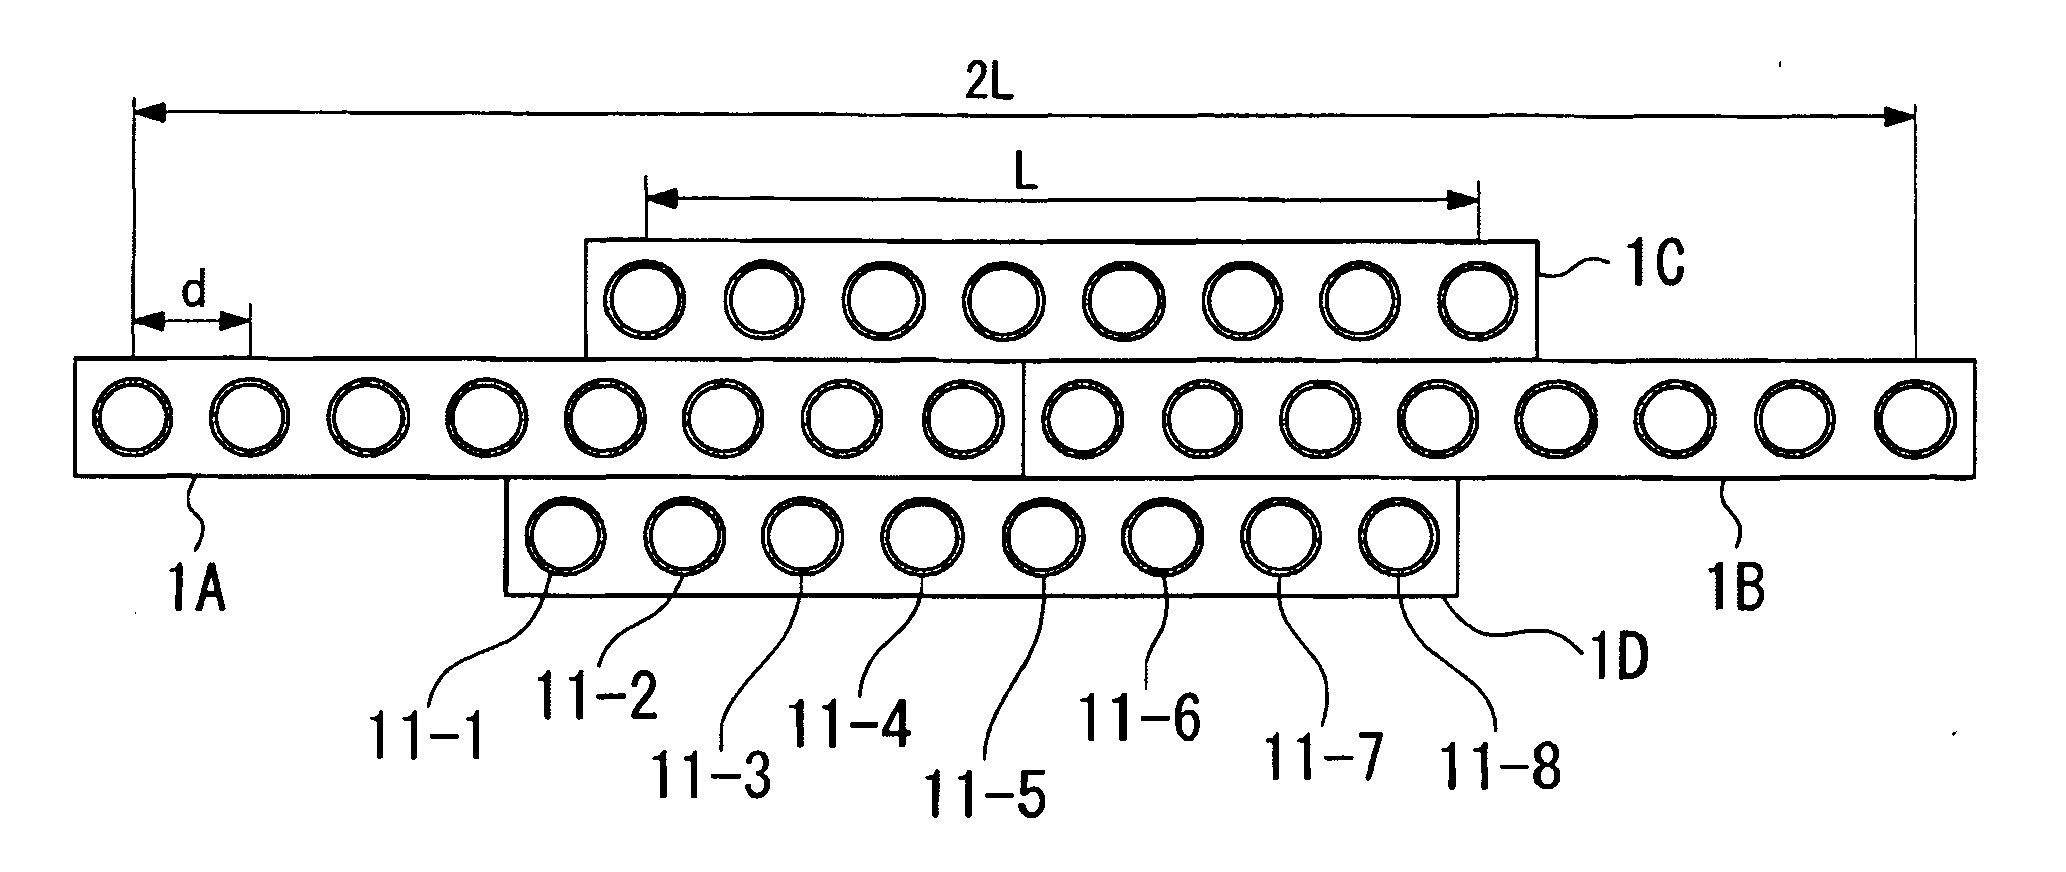 Array speaker system and array microphone system